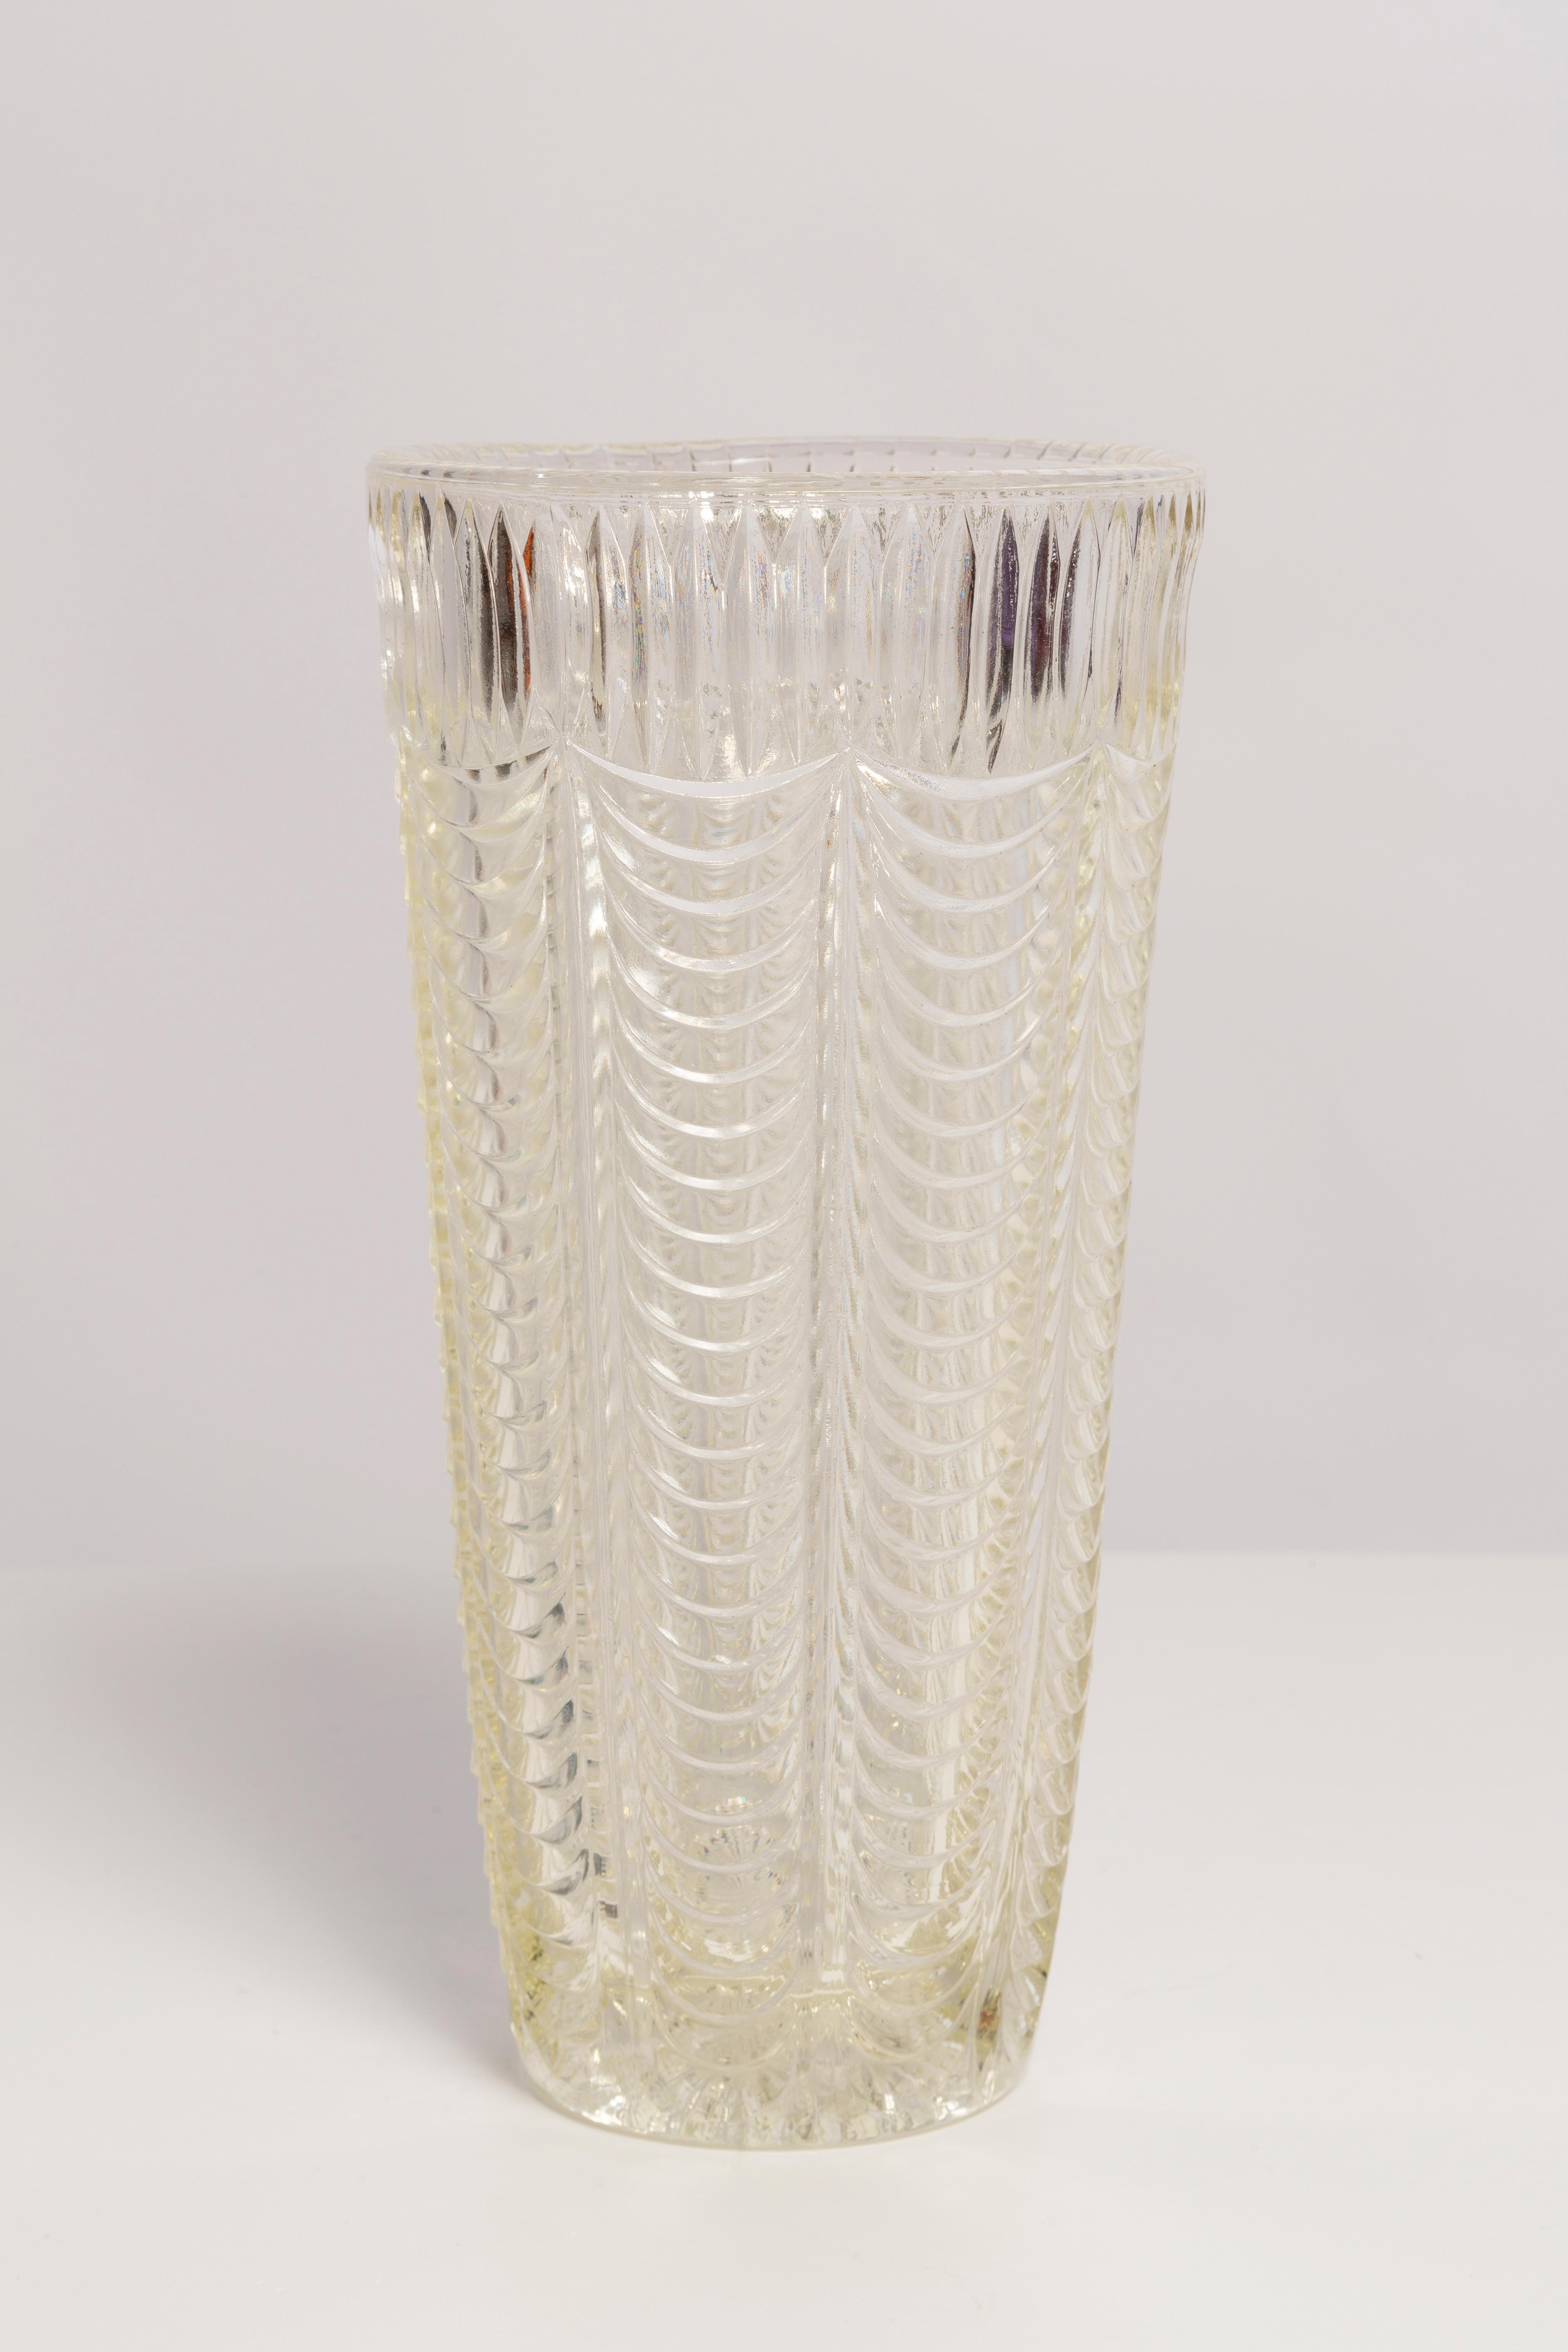 Transparent vase in amazing shape. Produced in 1960s.
Glass in perfect condition. The vase looks like it has just been taken out of the box.

No jags, defects etc. The outer relief surface, the inner smooth. 
Thick glass vase, massive.

The